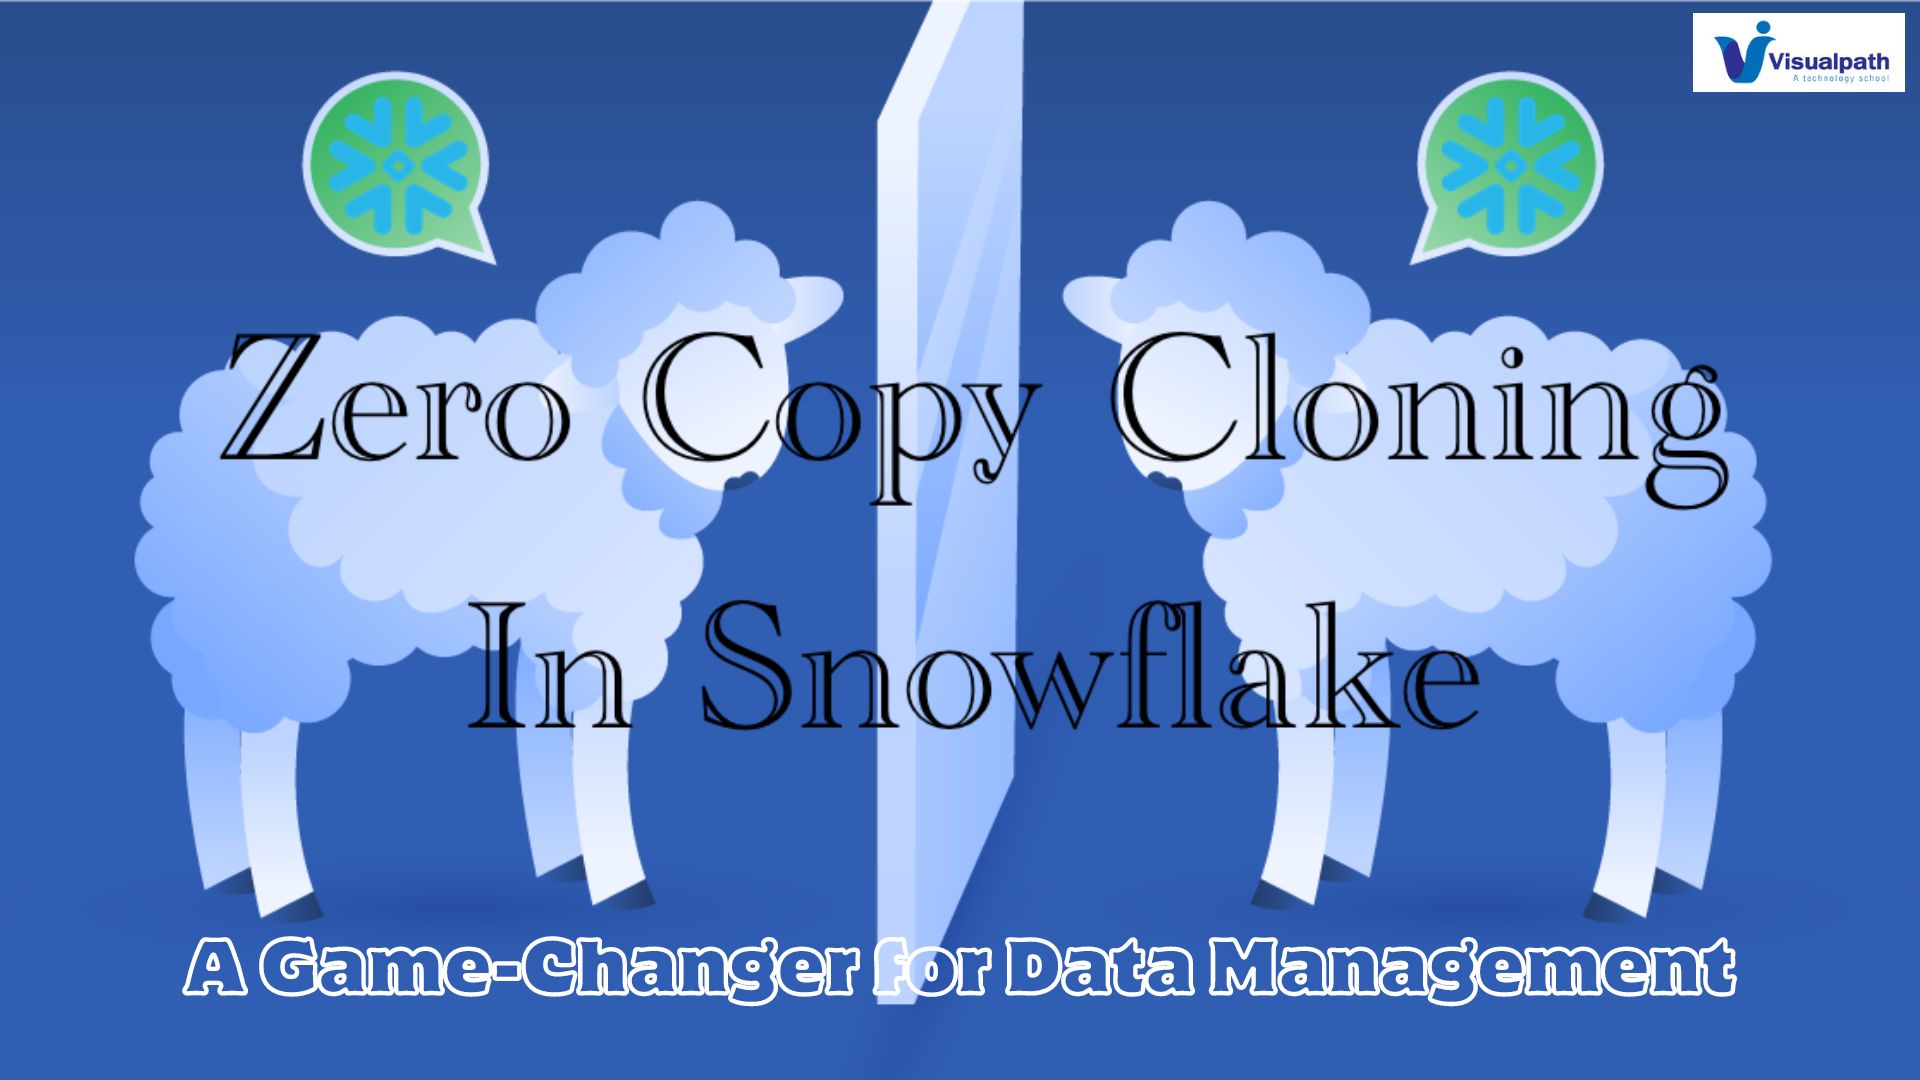 Zero Copy Cloning in Snowflake: A Game-Changer for Data Management